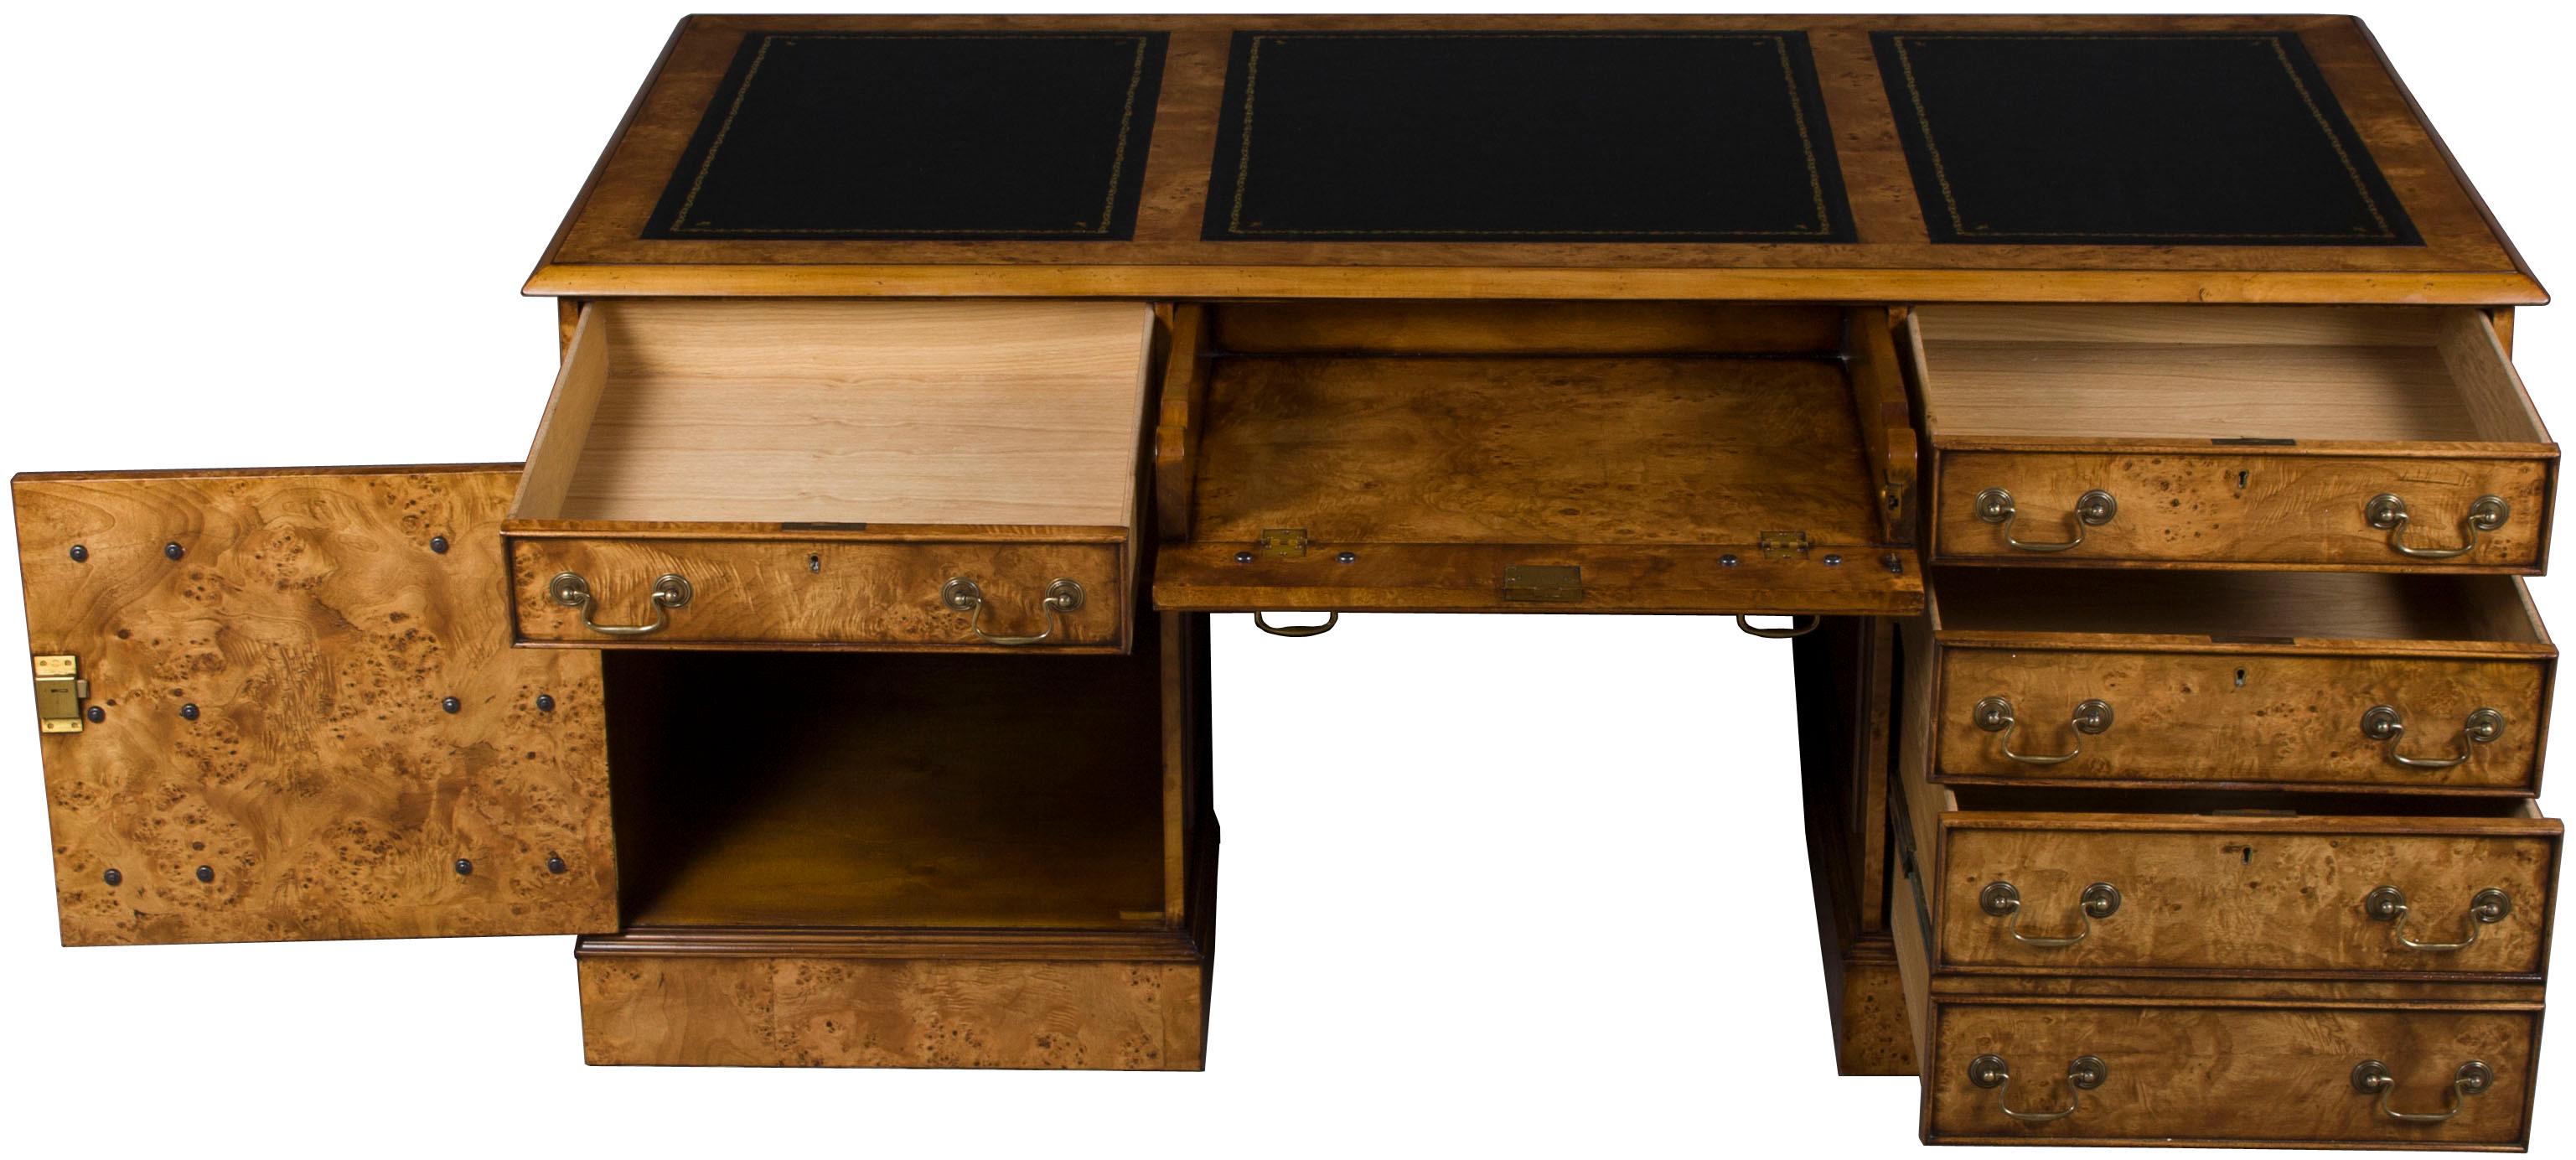 Whether for home or work, this large office desk is sure to make your environment more elegant and pleasurable! It provides a huge work surface, plenty of storage, and an antique feel. It’s heirloom quality construction means it will last for